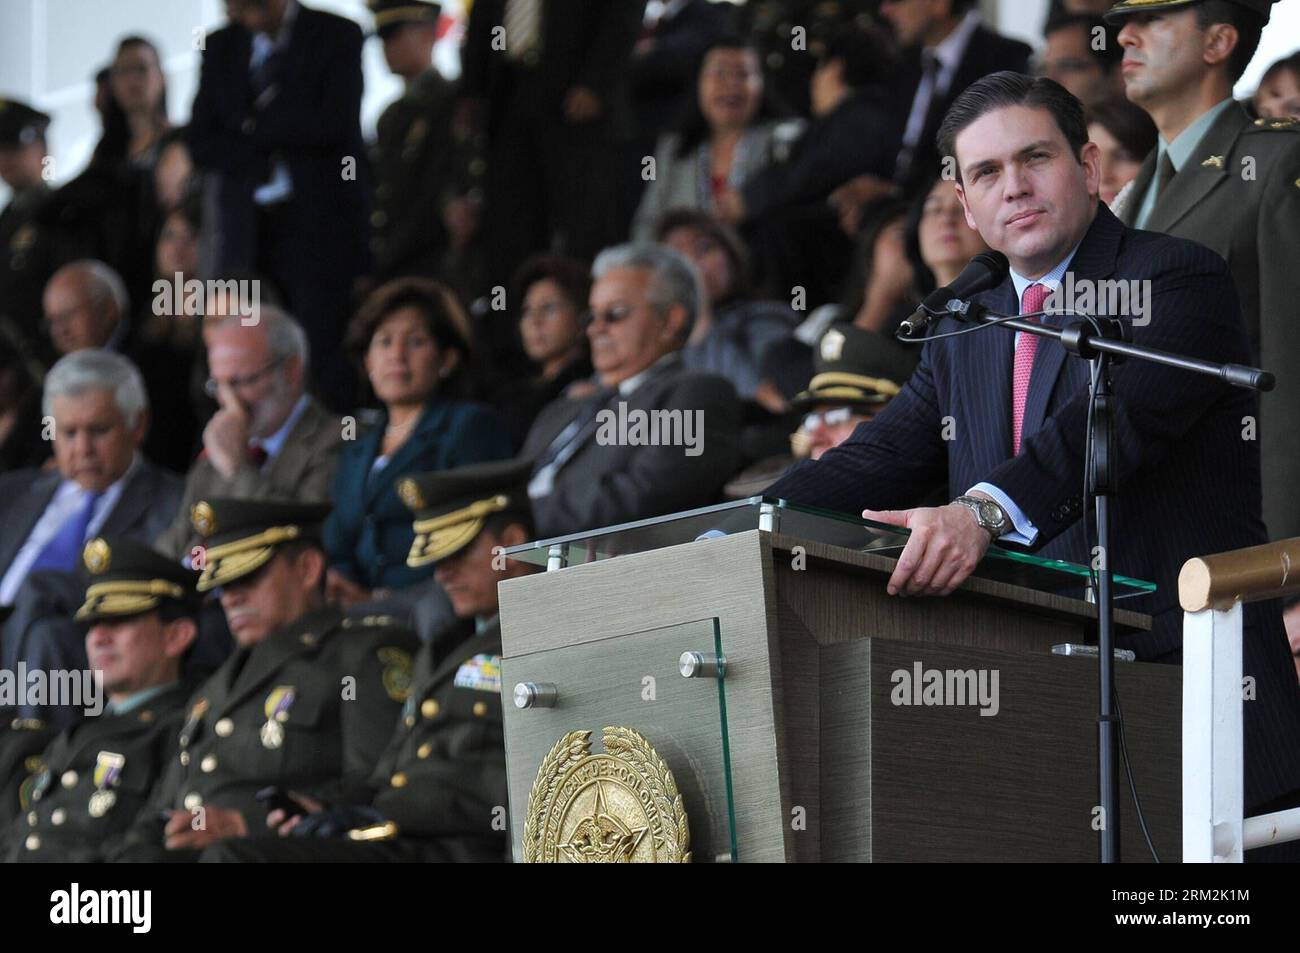 Bildnummer: 59855259  Datum: 18.06.2013  Copyright: imago/Xinhua BOGOTA, June 18, 2013 - Image provided by the Ministry of Defense of Colombia shows Colombian Minister of Defense Juan Carlos Pinzon (R), delivering a speech during the Promotion Ceremony for 227 Officers of the National Police, at the Cadet School Francisco de Paula Santander in Bogota, capital of Colombia, on June 18, 2013. Juan Carlos Pinzon promoted 227 officers of the police to the ranks of liutenant, captain, major, lieutenat colonel and colonel, during the ceremony held in Bogota on Tuesday. (Xinhua/Defense Ministry) COLOM Stock Photo